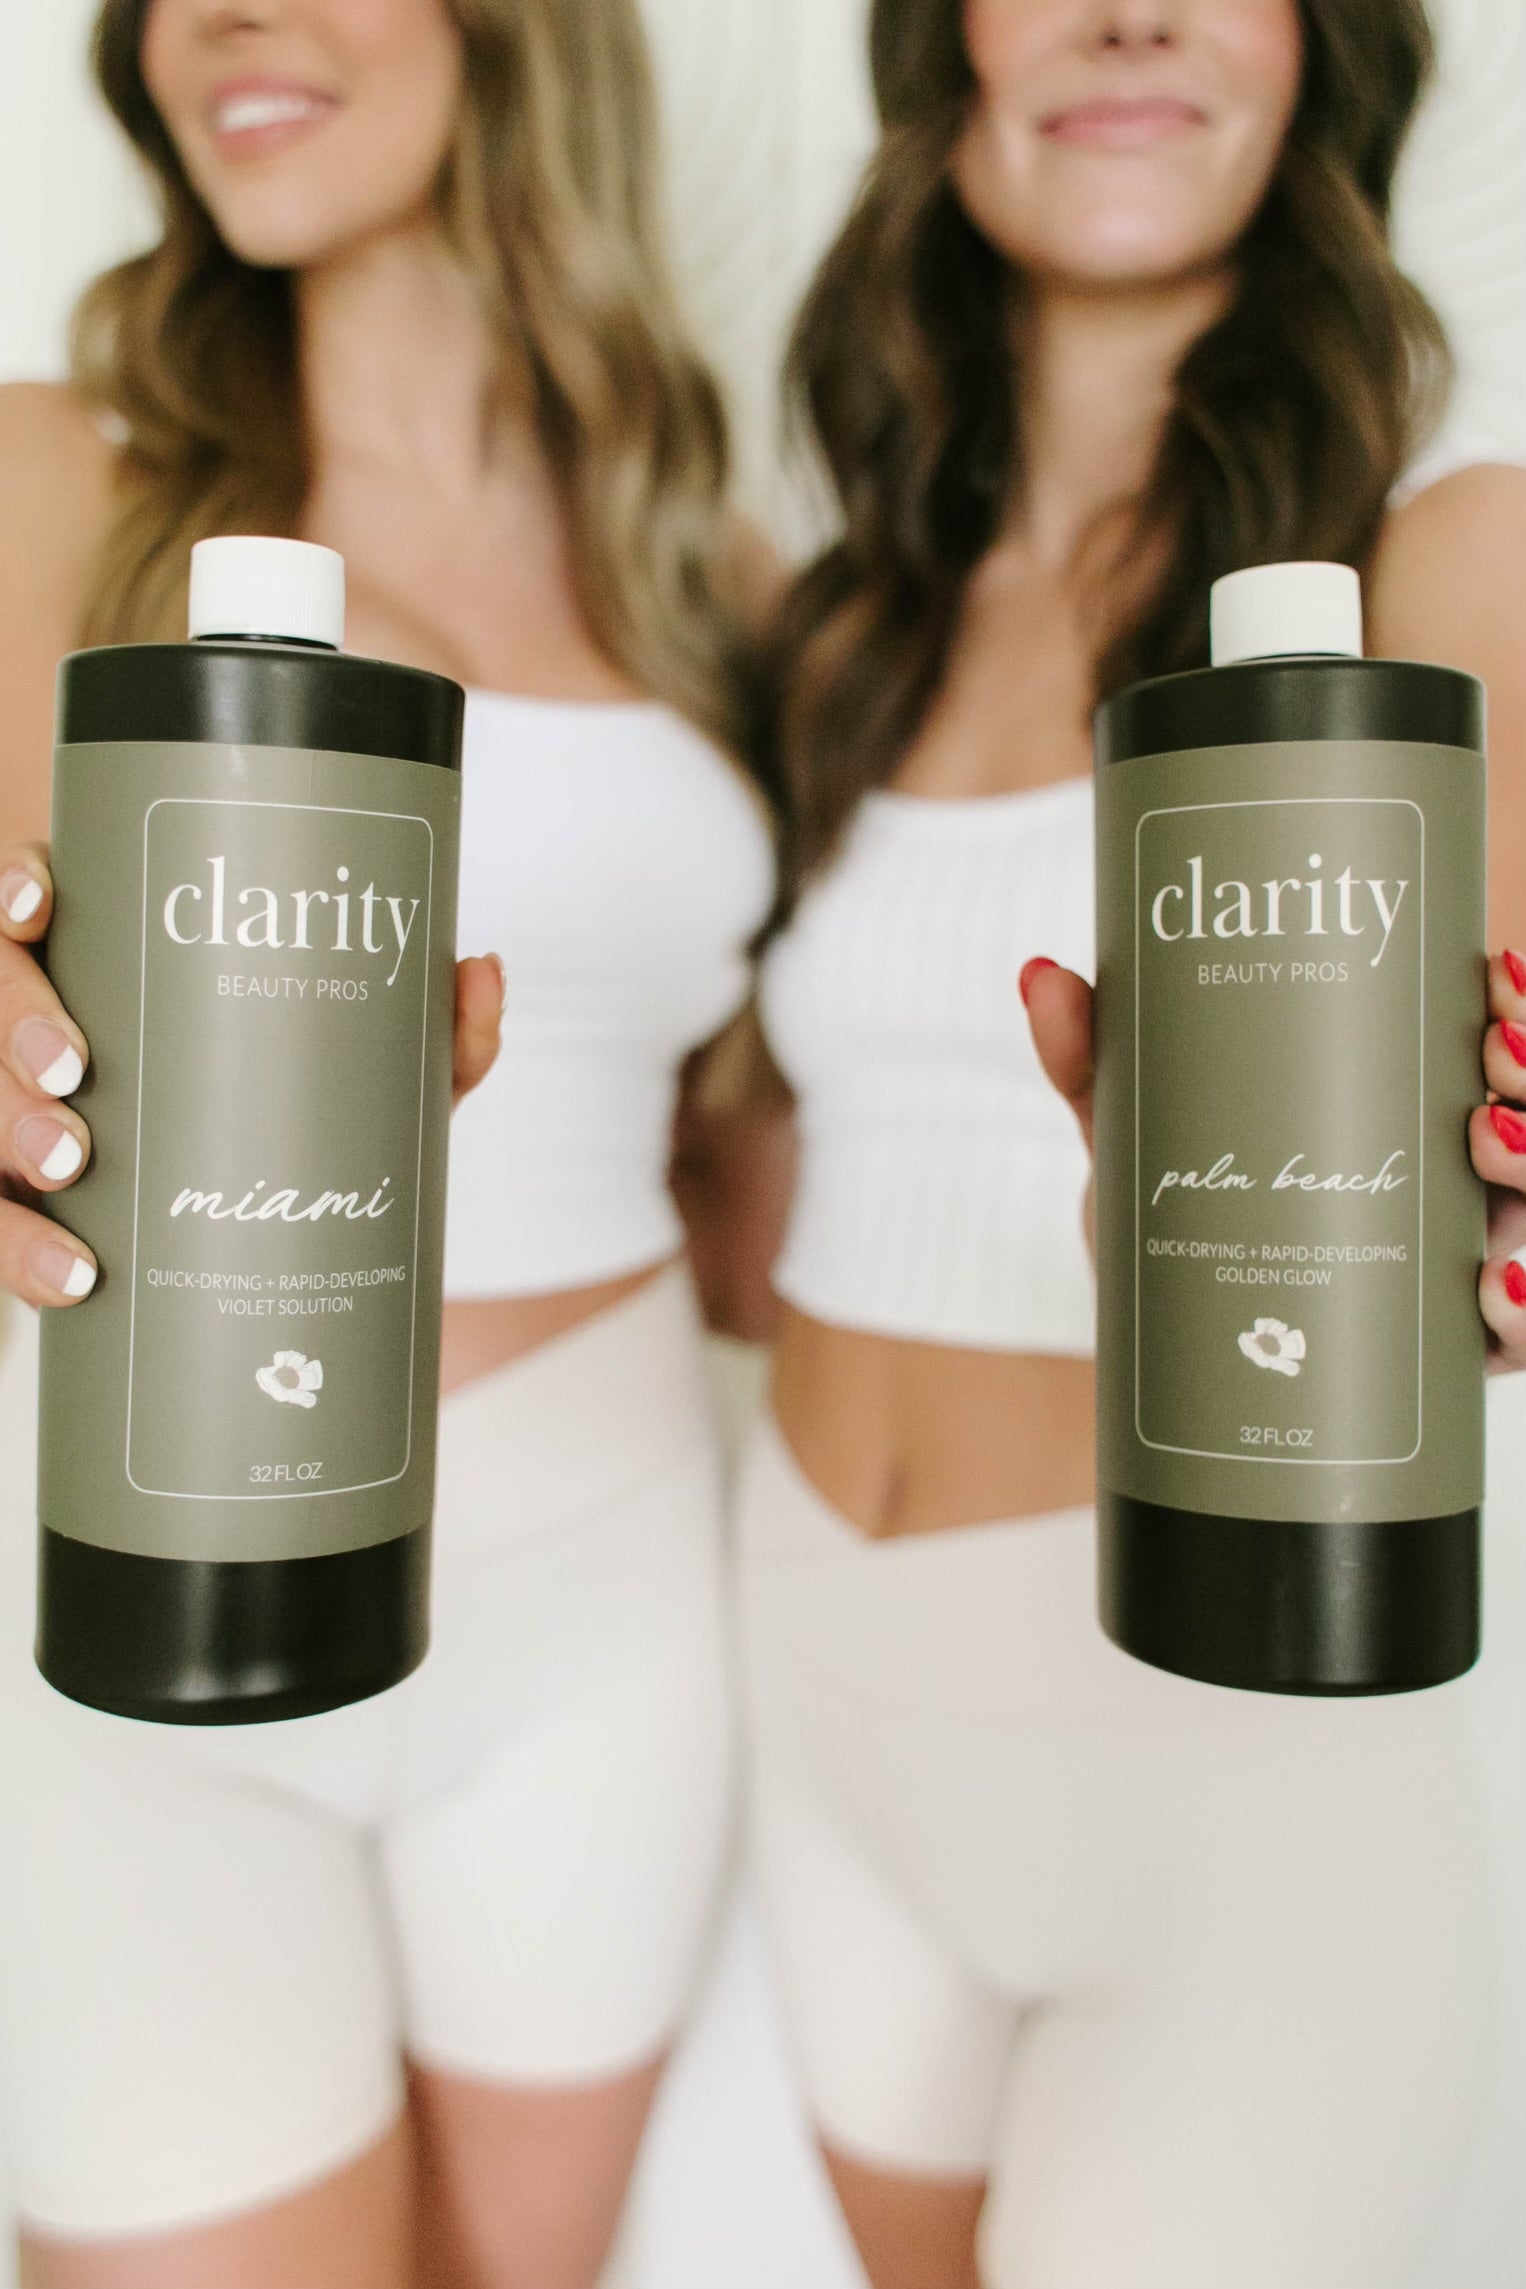 Clarity Sunless Tanning